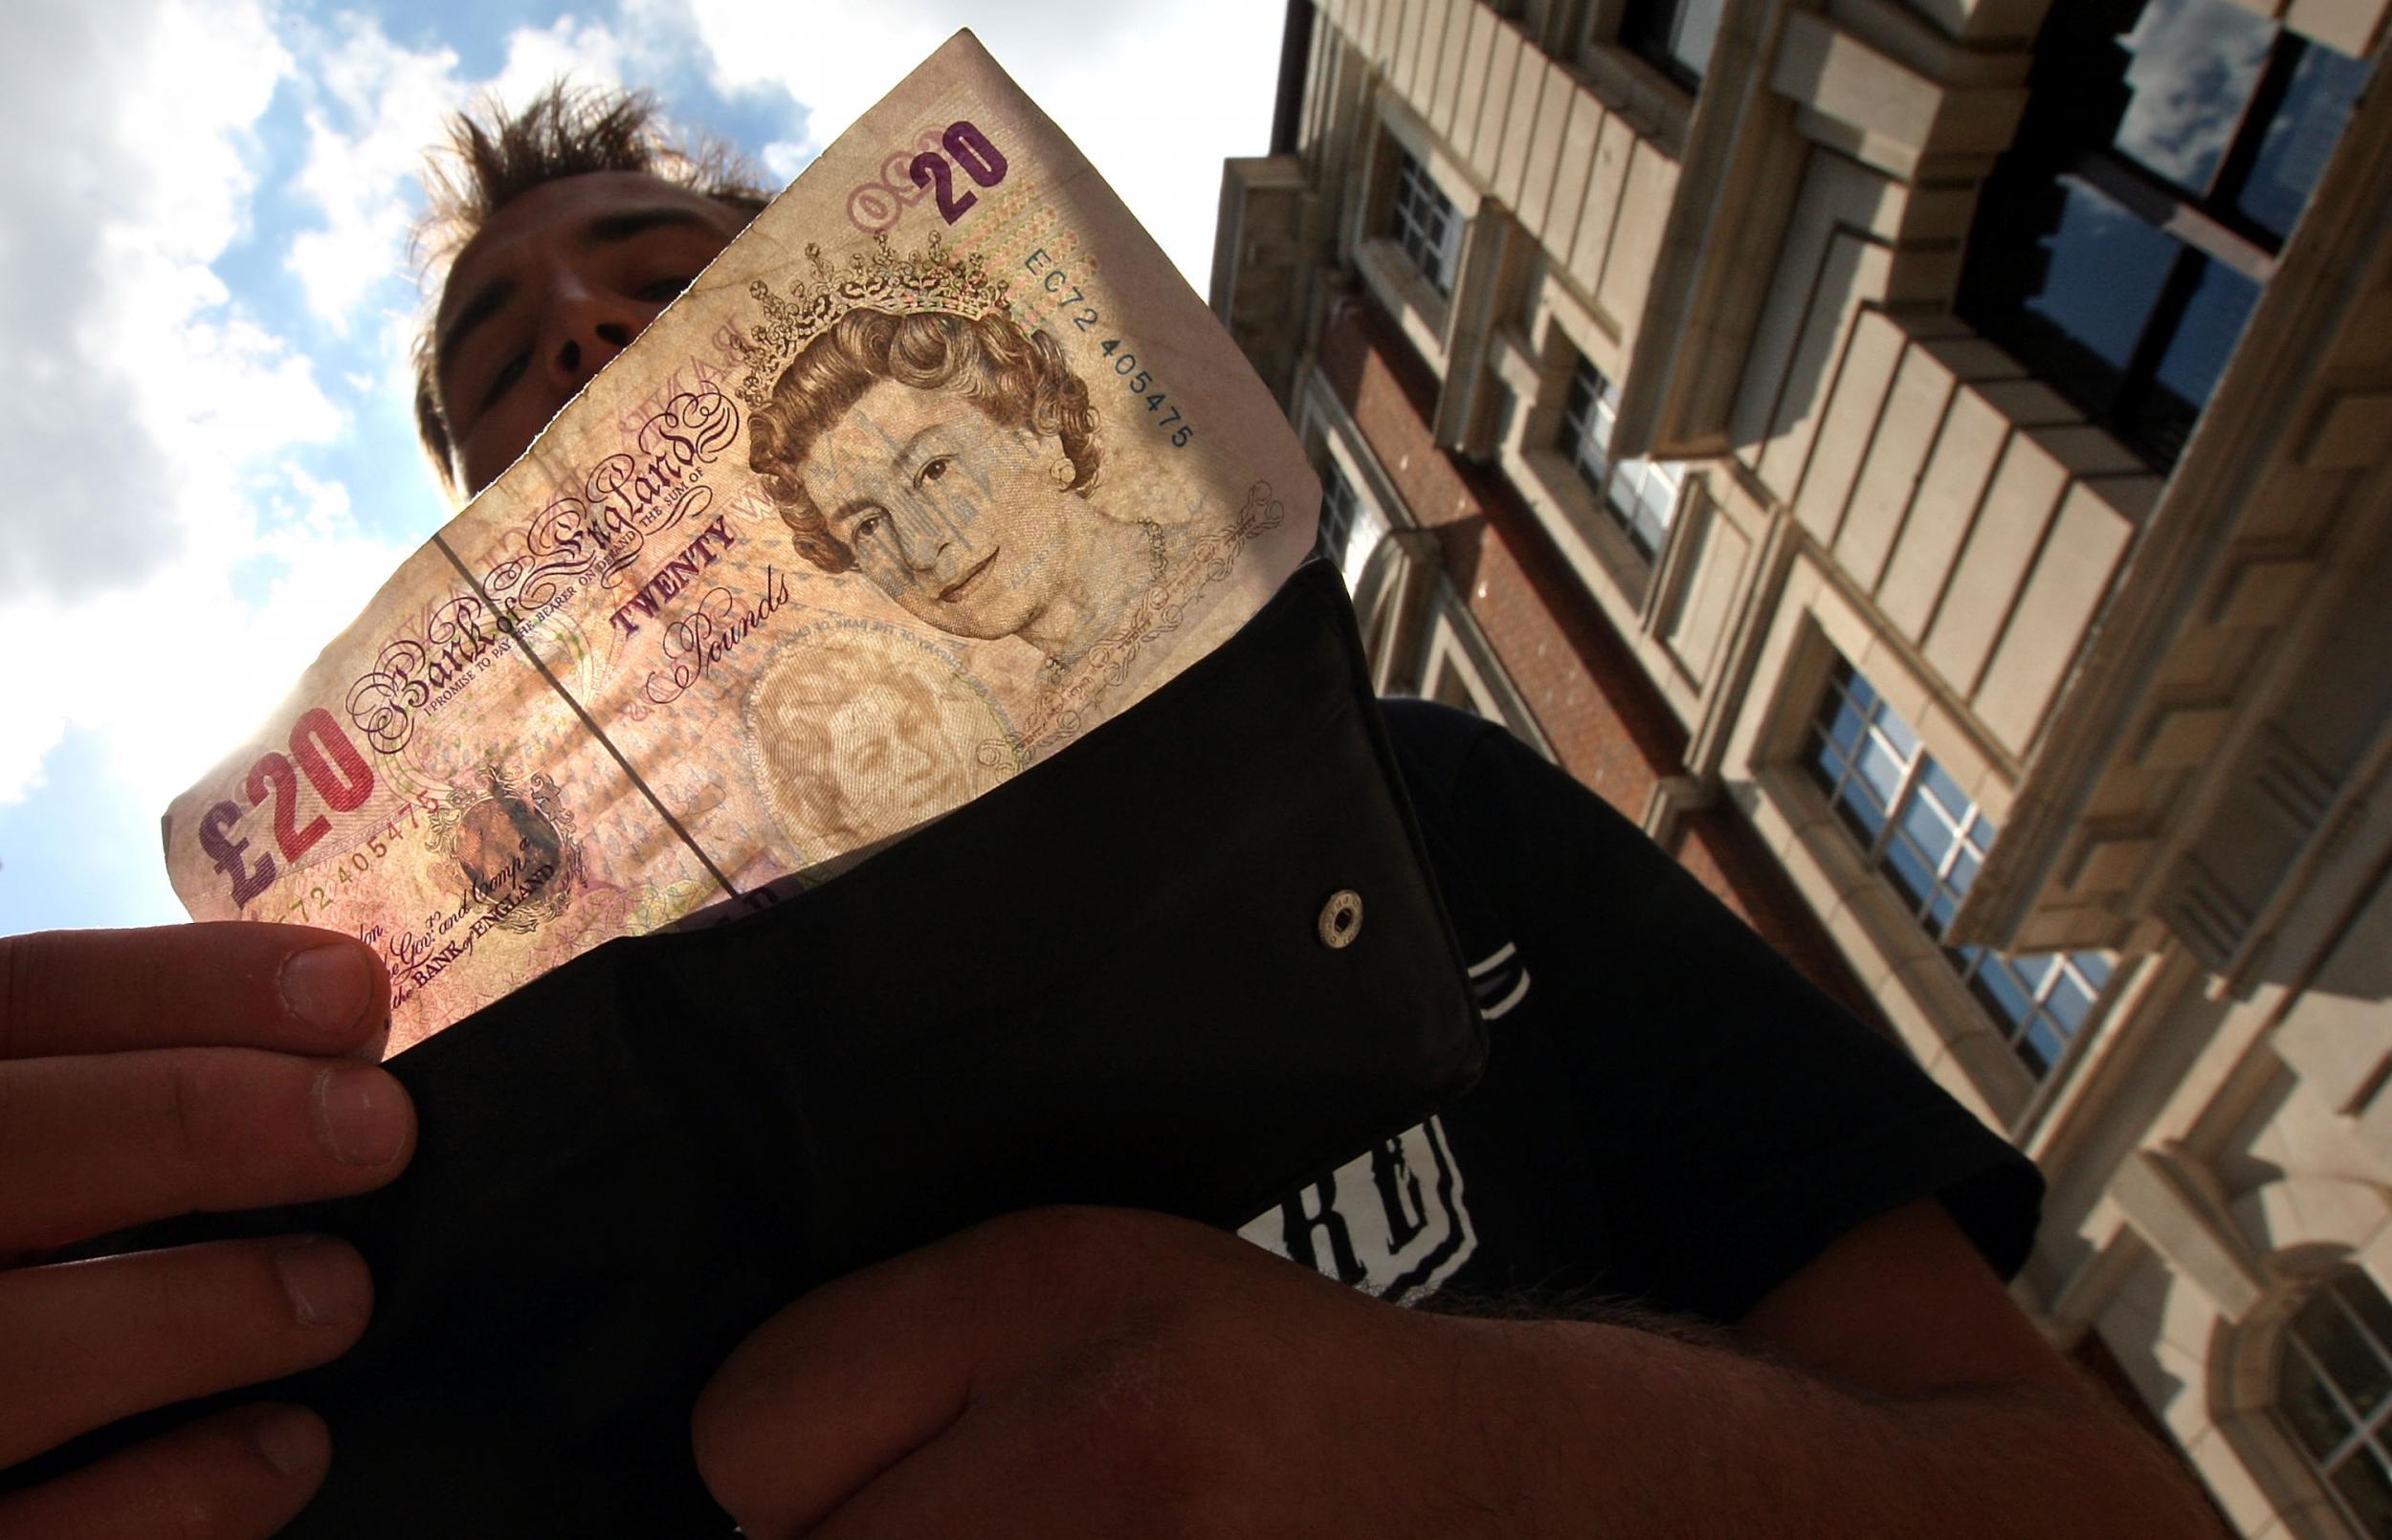 The hourly National Living Wage could be lower than forecast due to weak wage growth